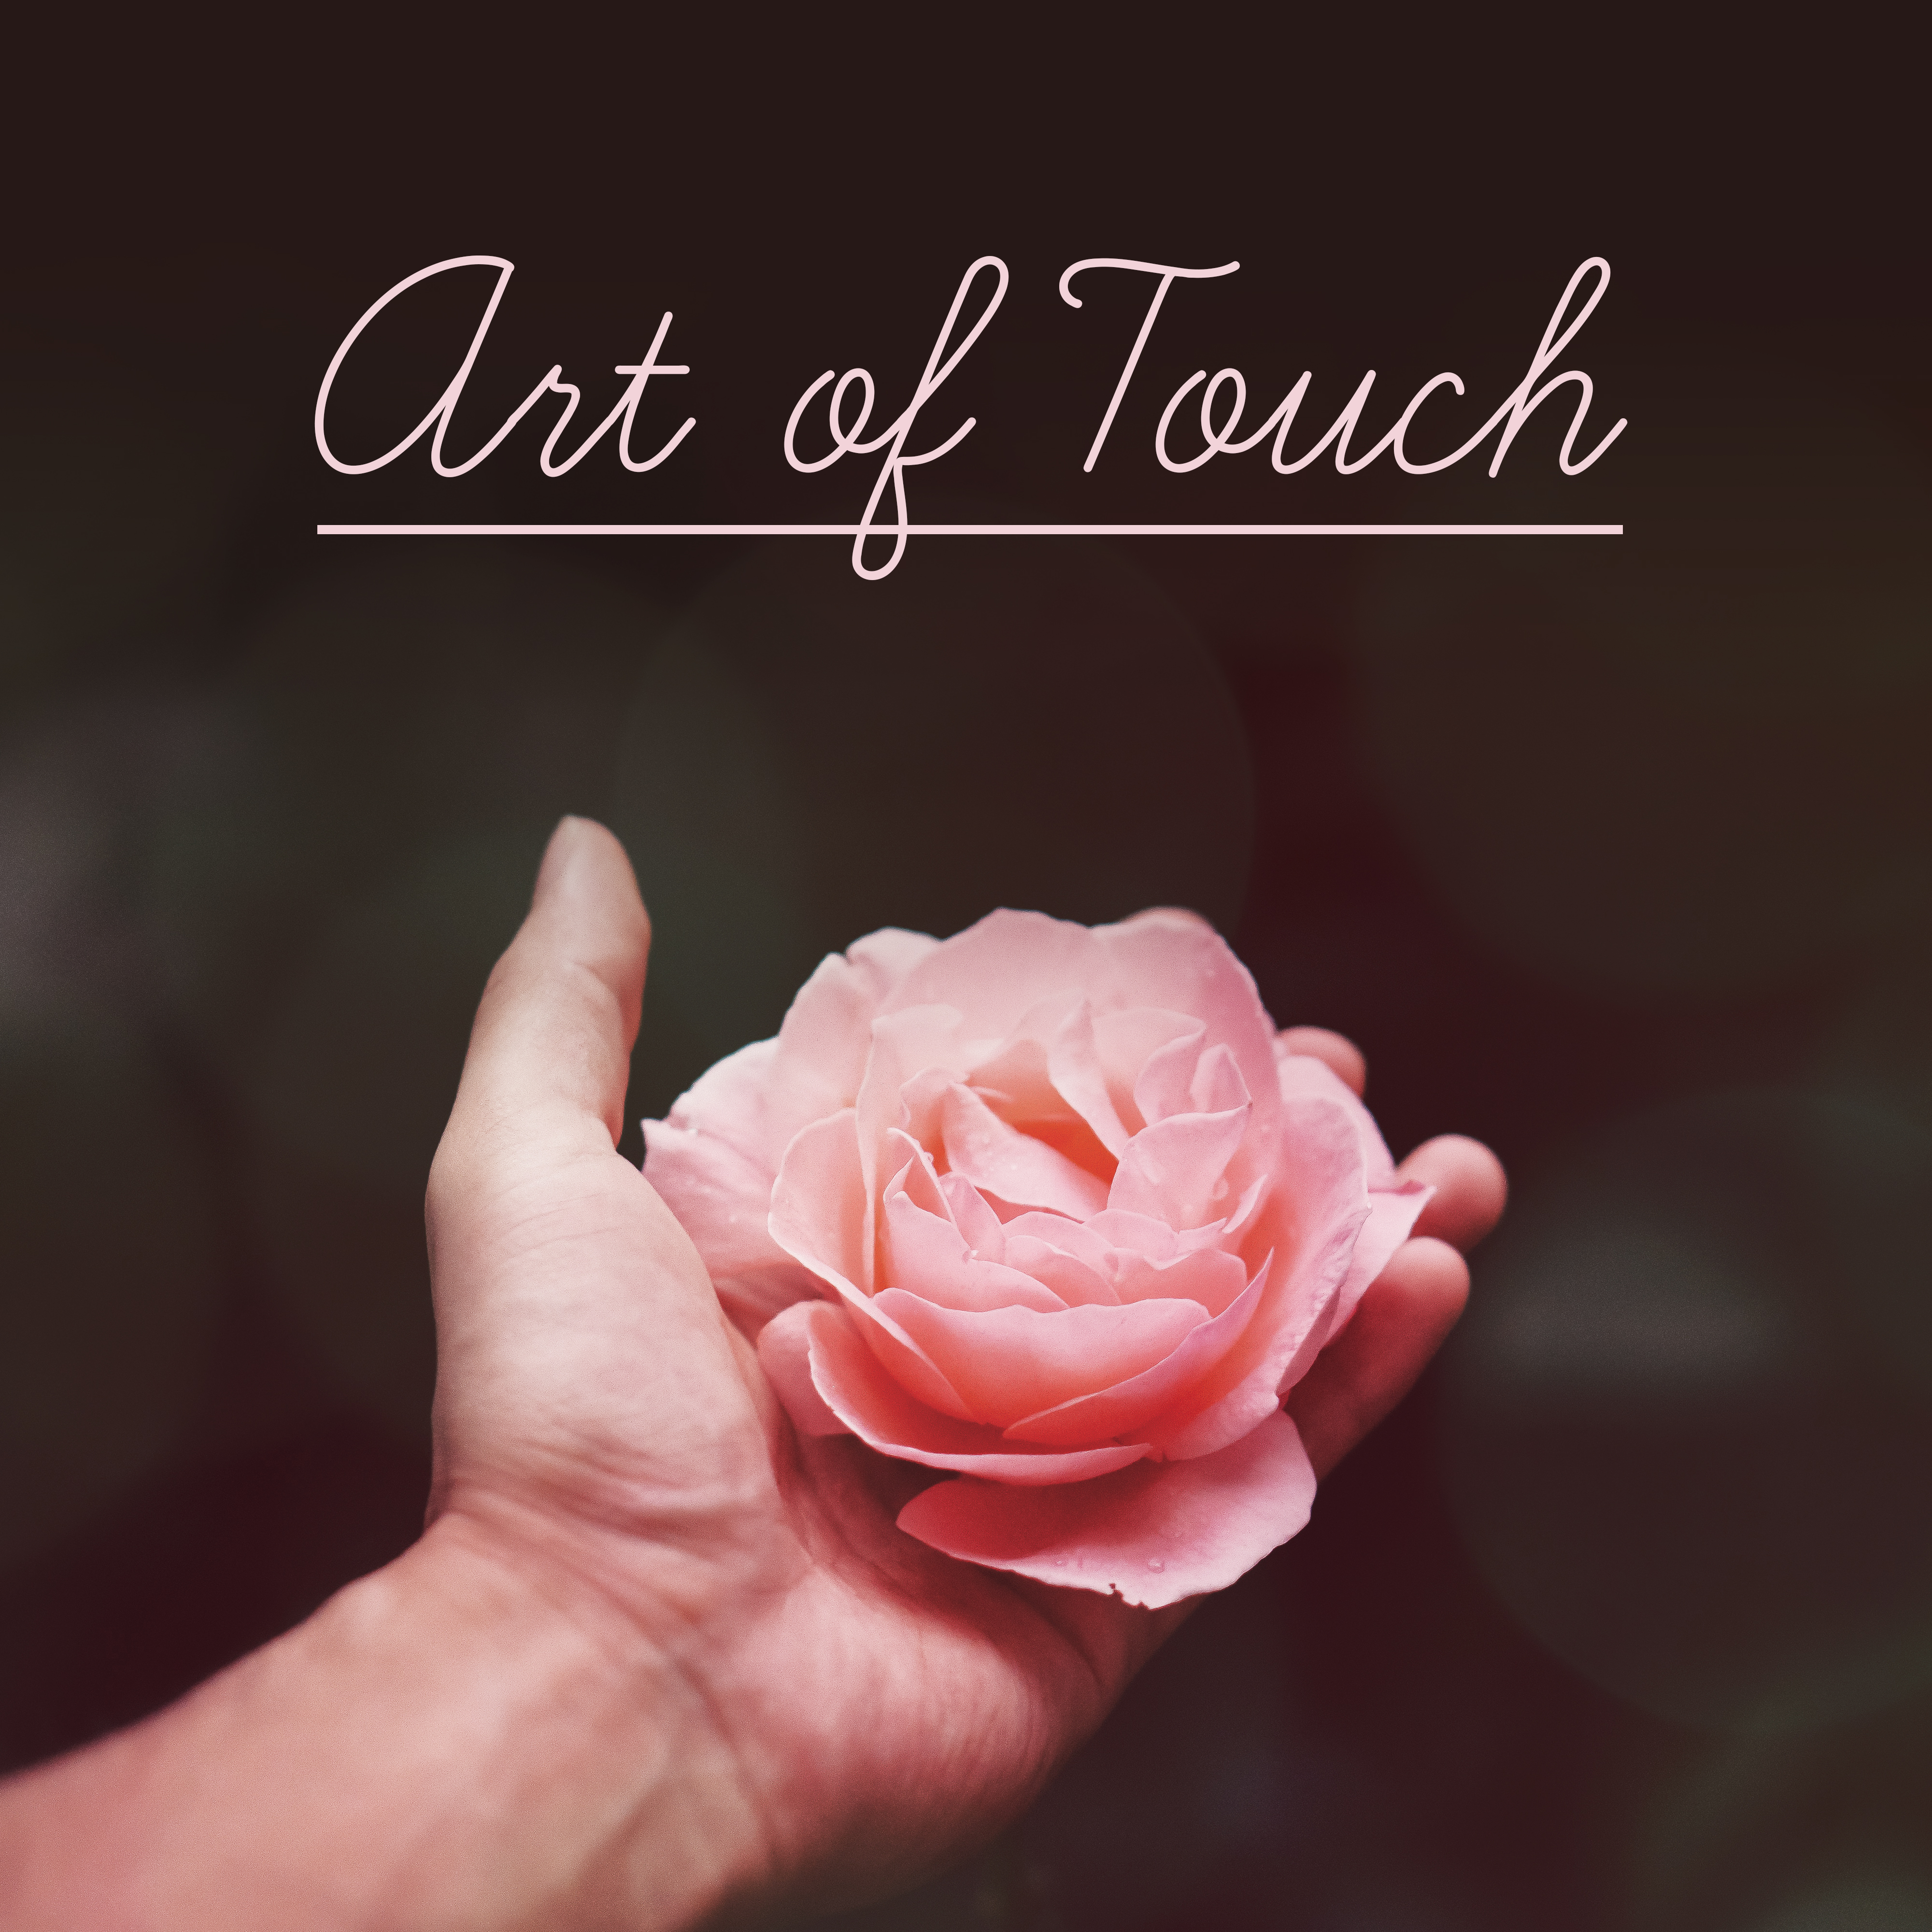 Art of Touch  Spa Relaxation, Massage, Calming Nature Sounds, New Age 2017, Pure Zen